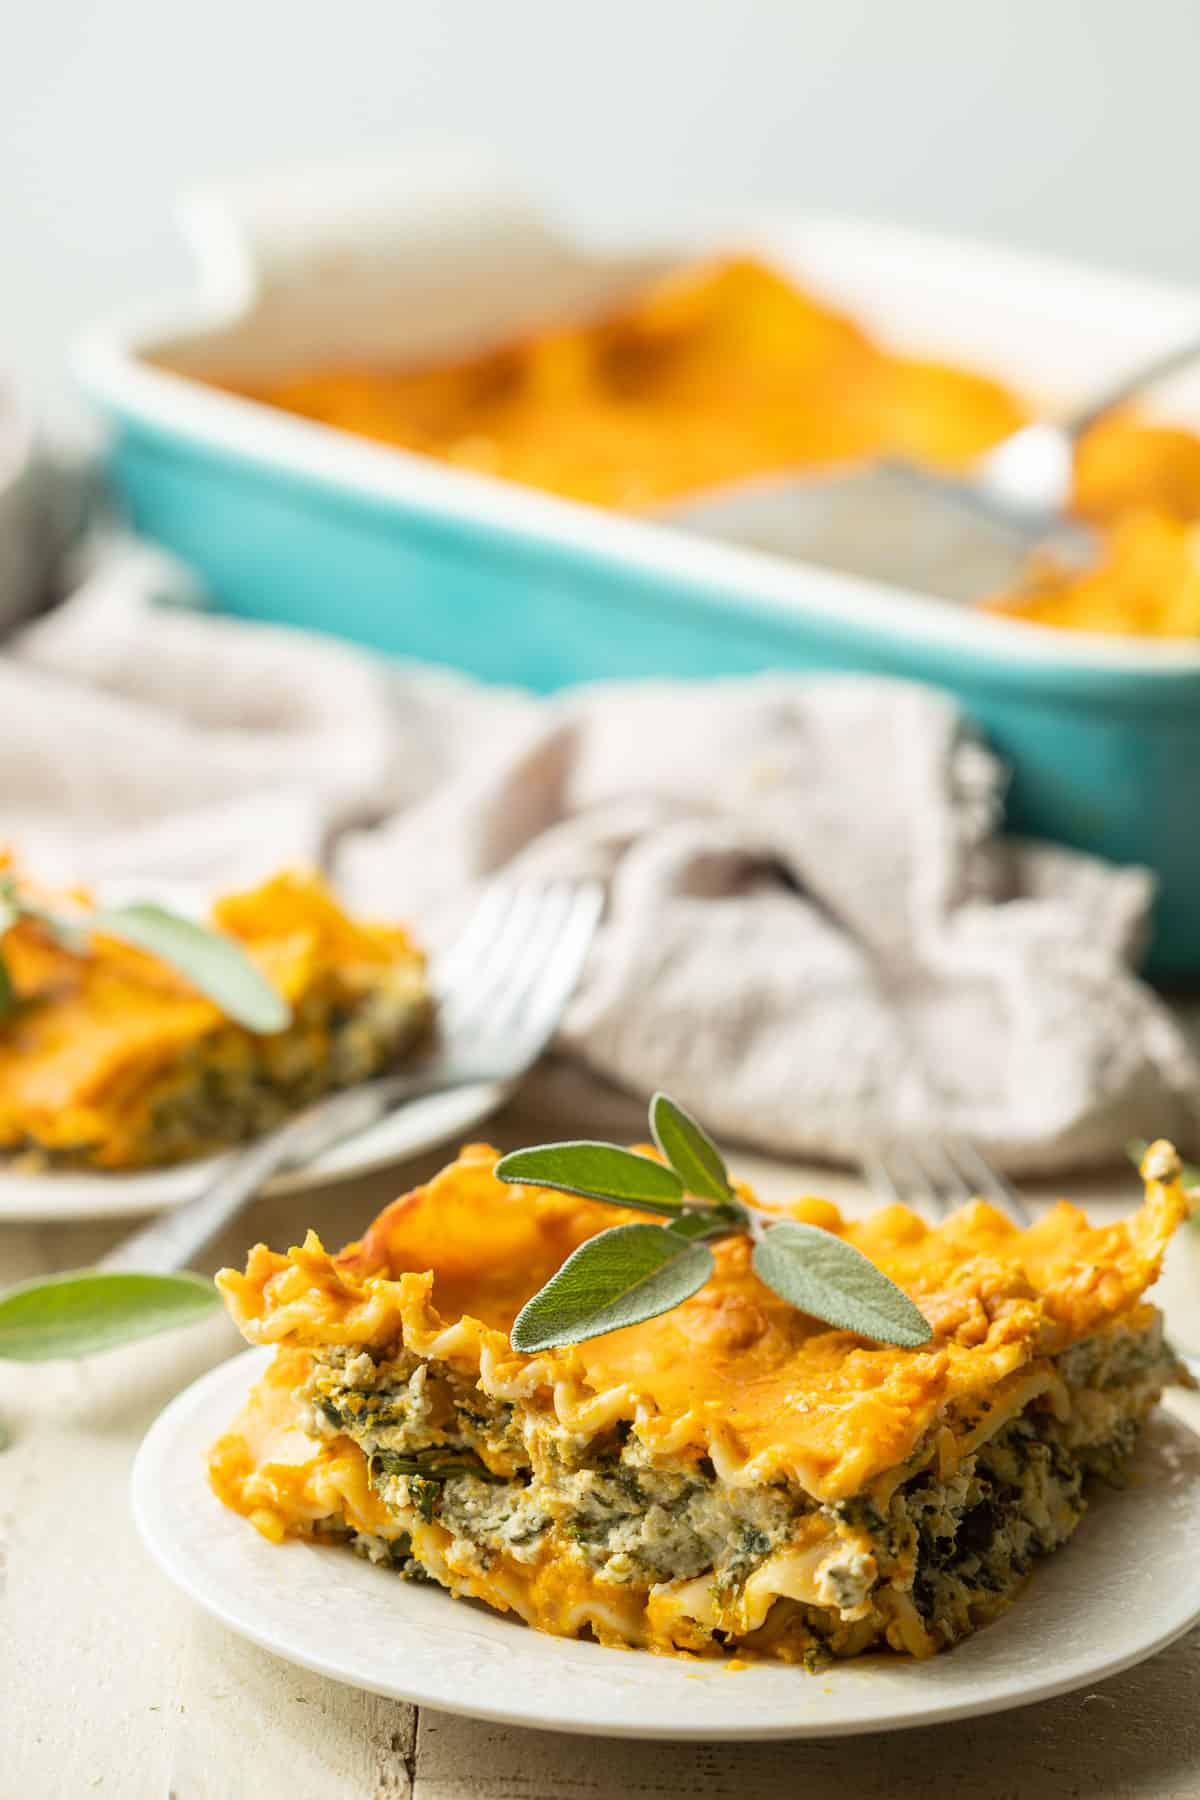 Slice of Vegan Pumpkin Lasagna on a plate with baking dish in the background.